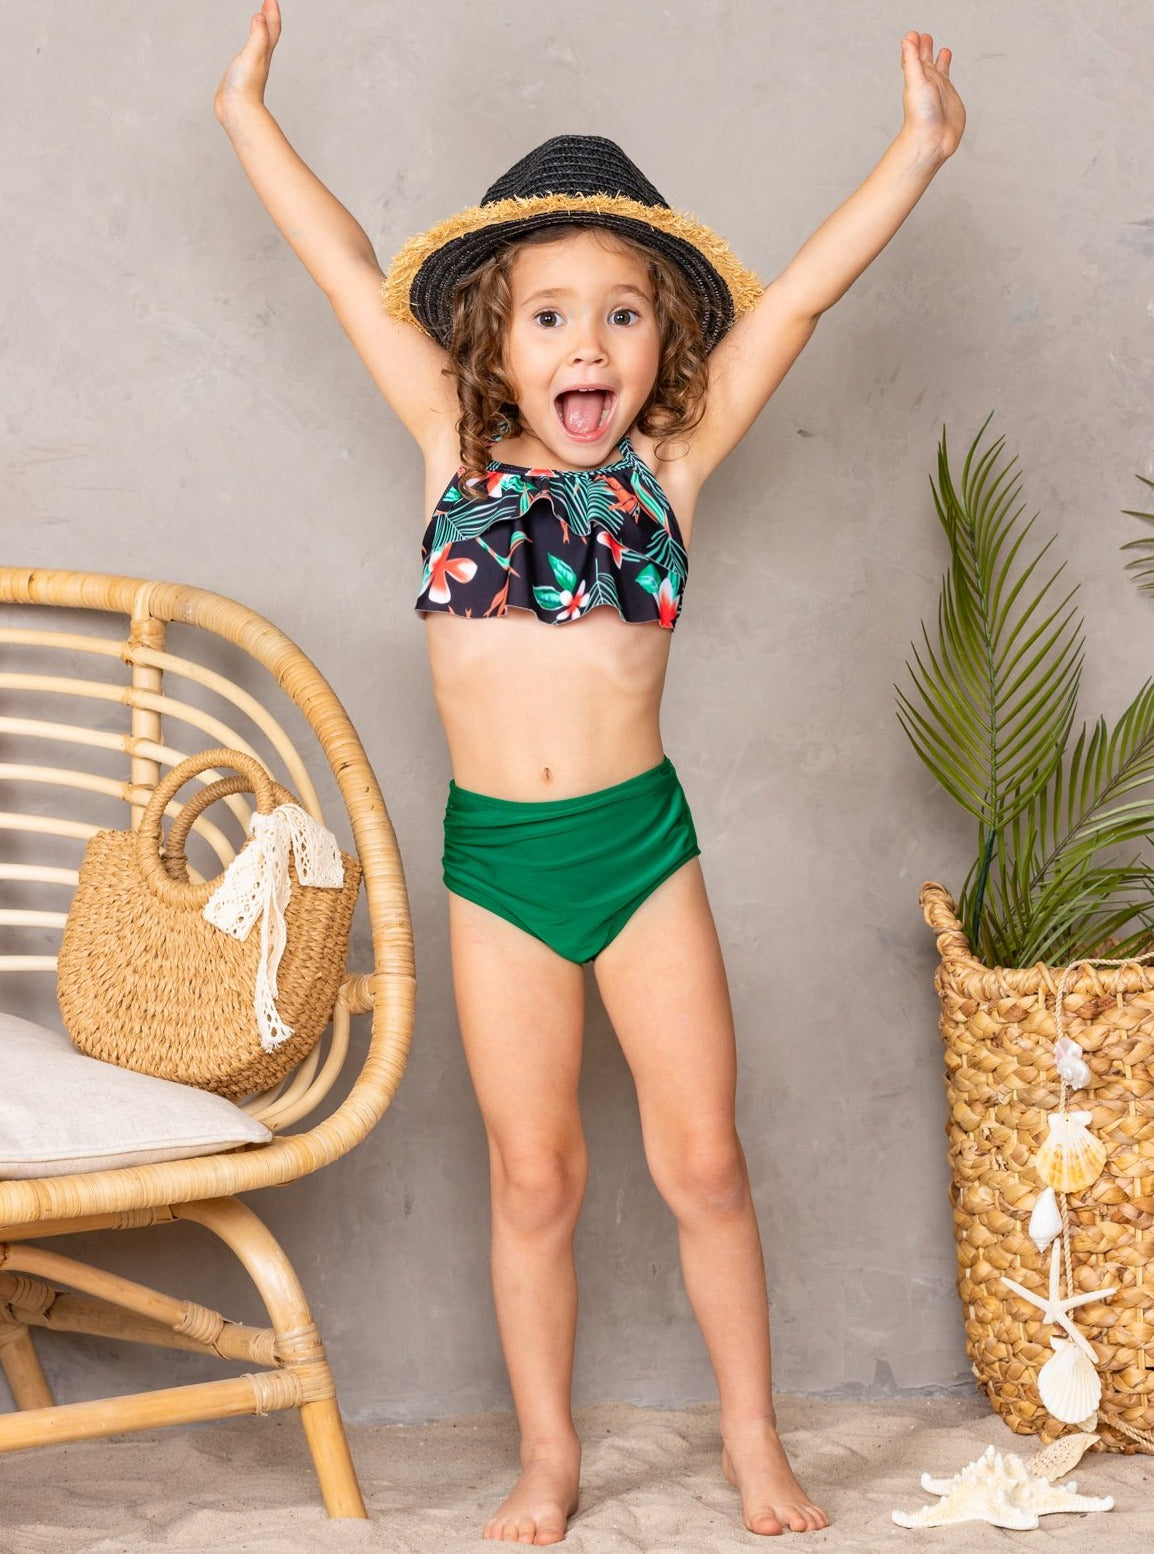 Mommy & Me Swimsuit | Tropical Two-Piece Swimsuit - Mia Belle Girls 